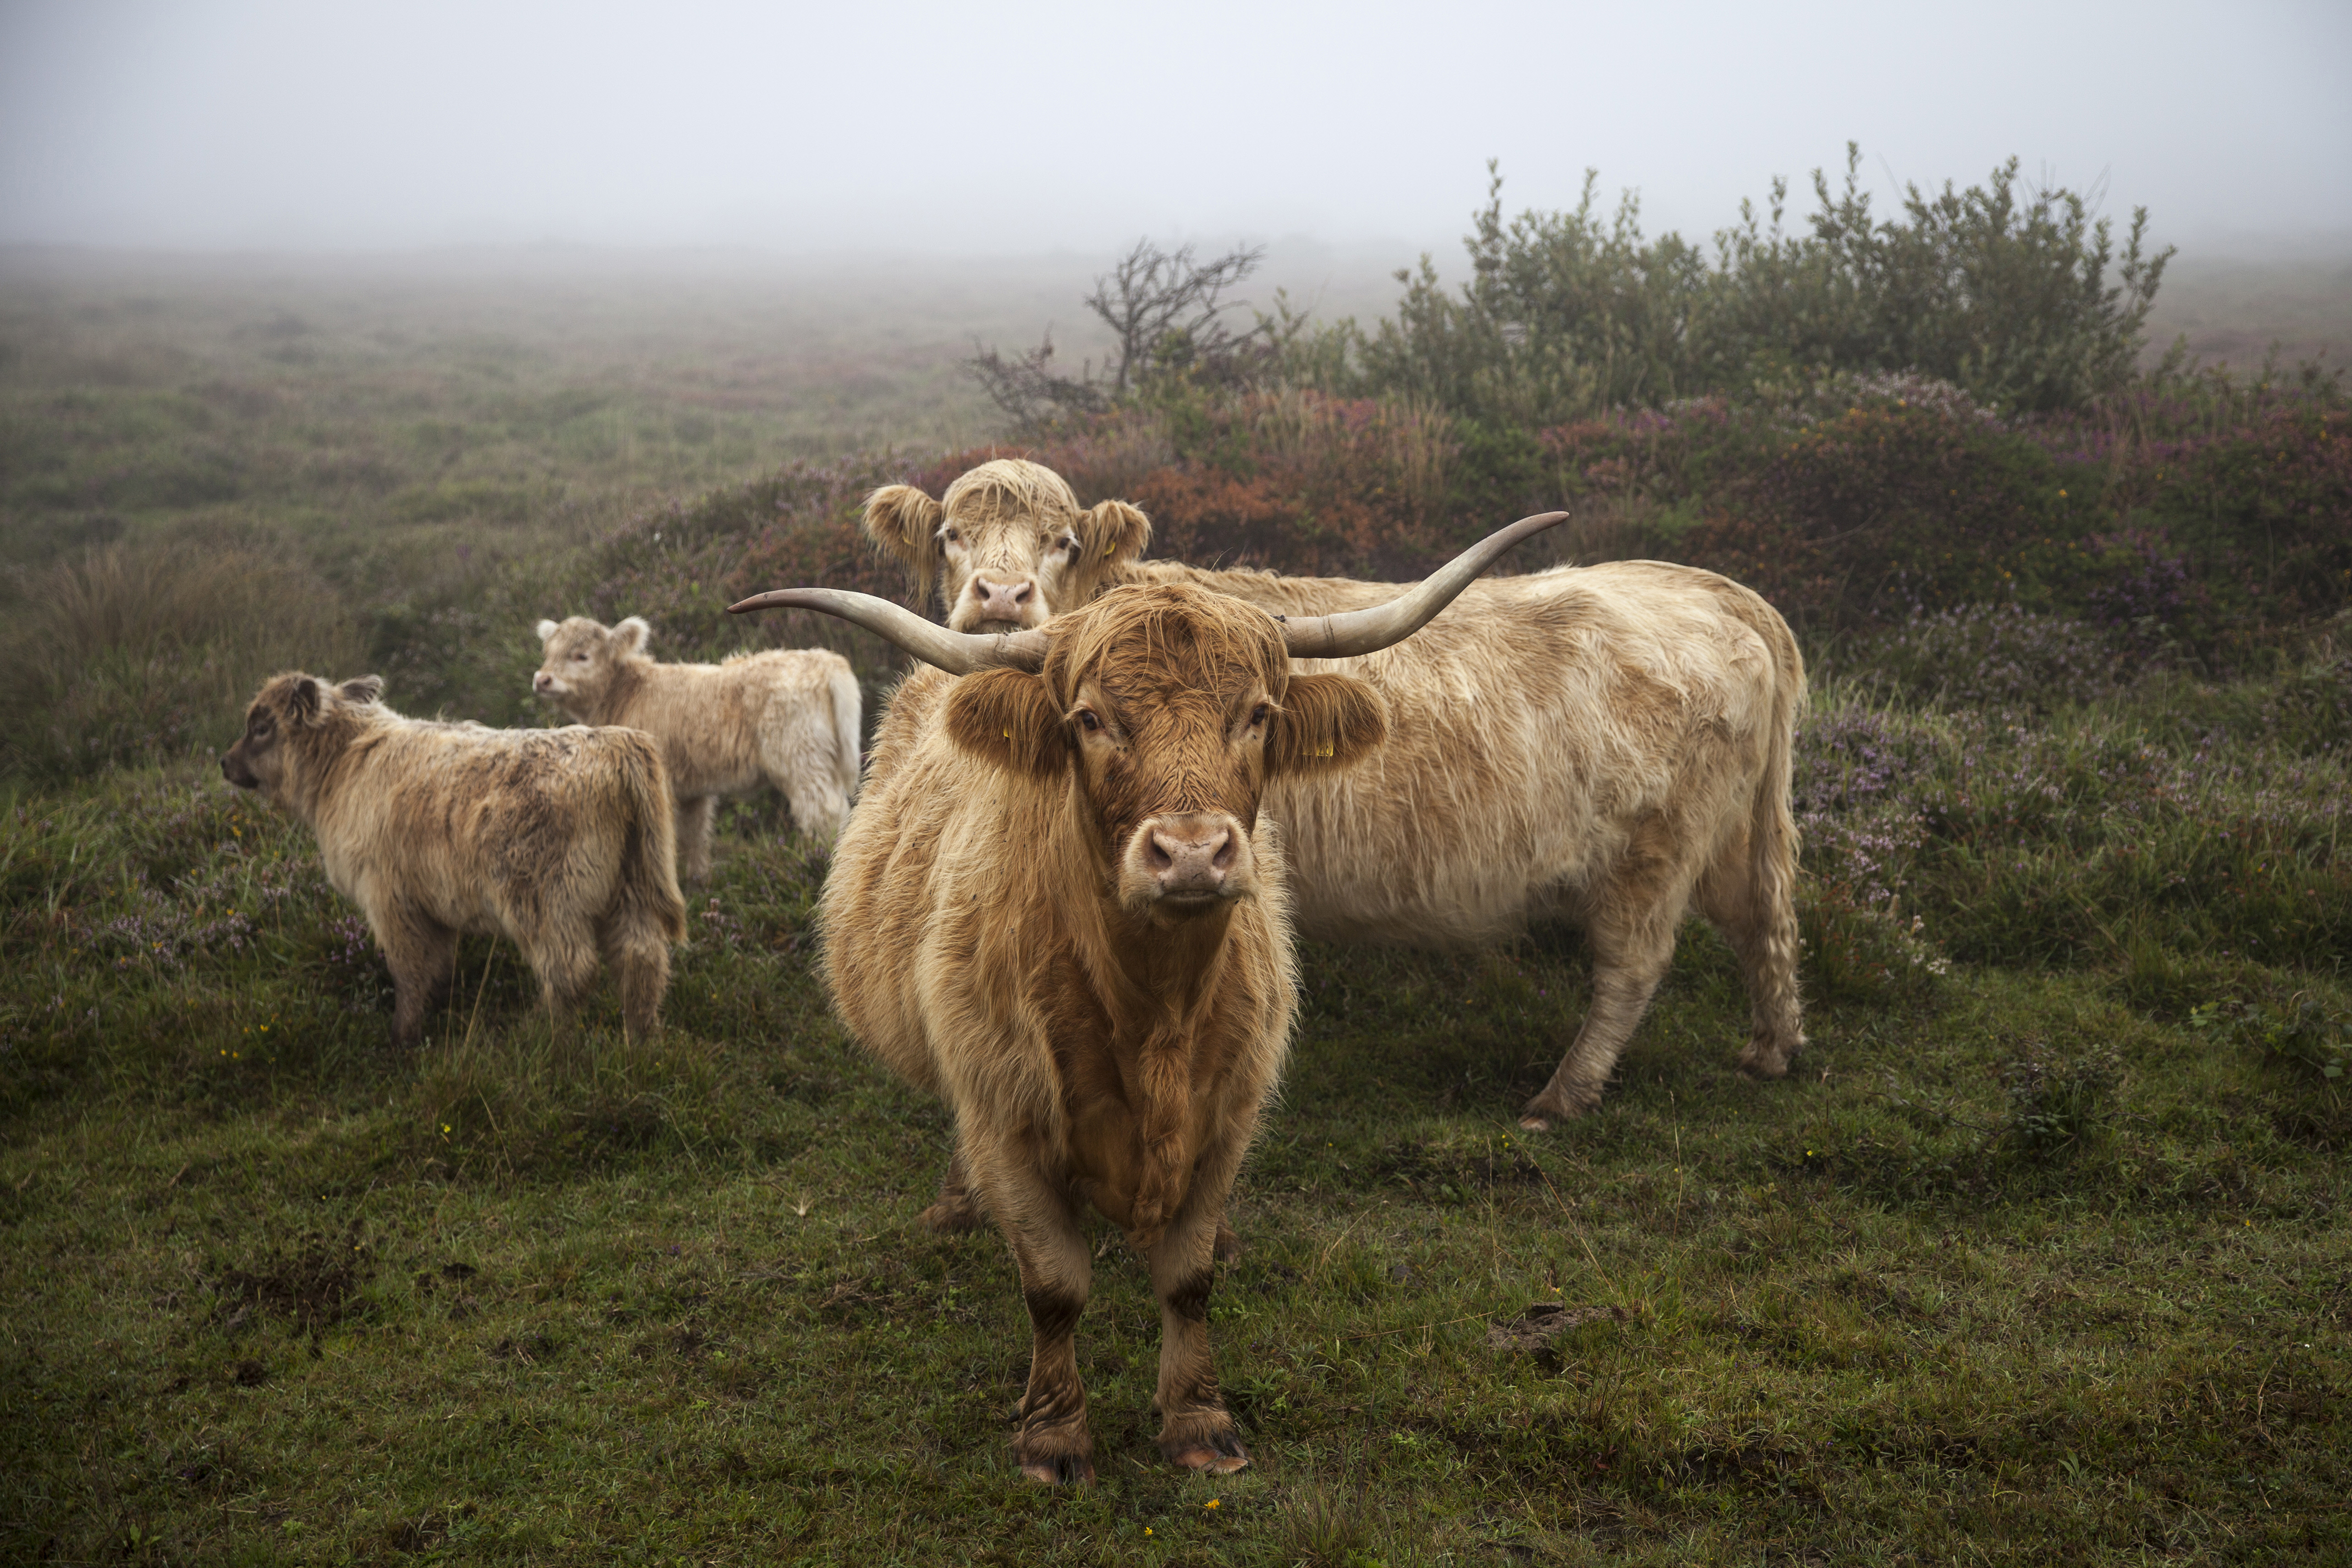 Group of Highland cattle with foggy landscape behind